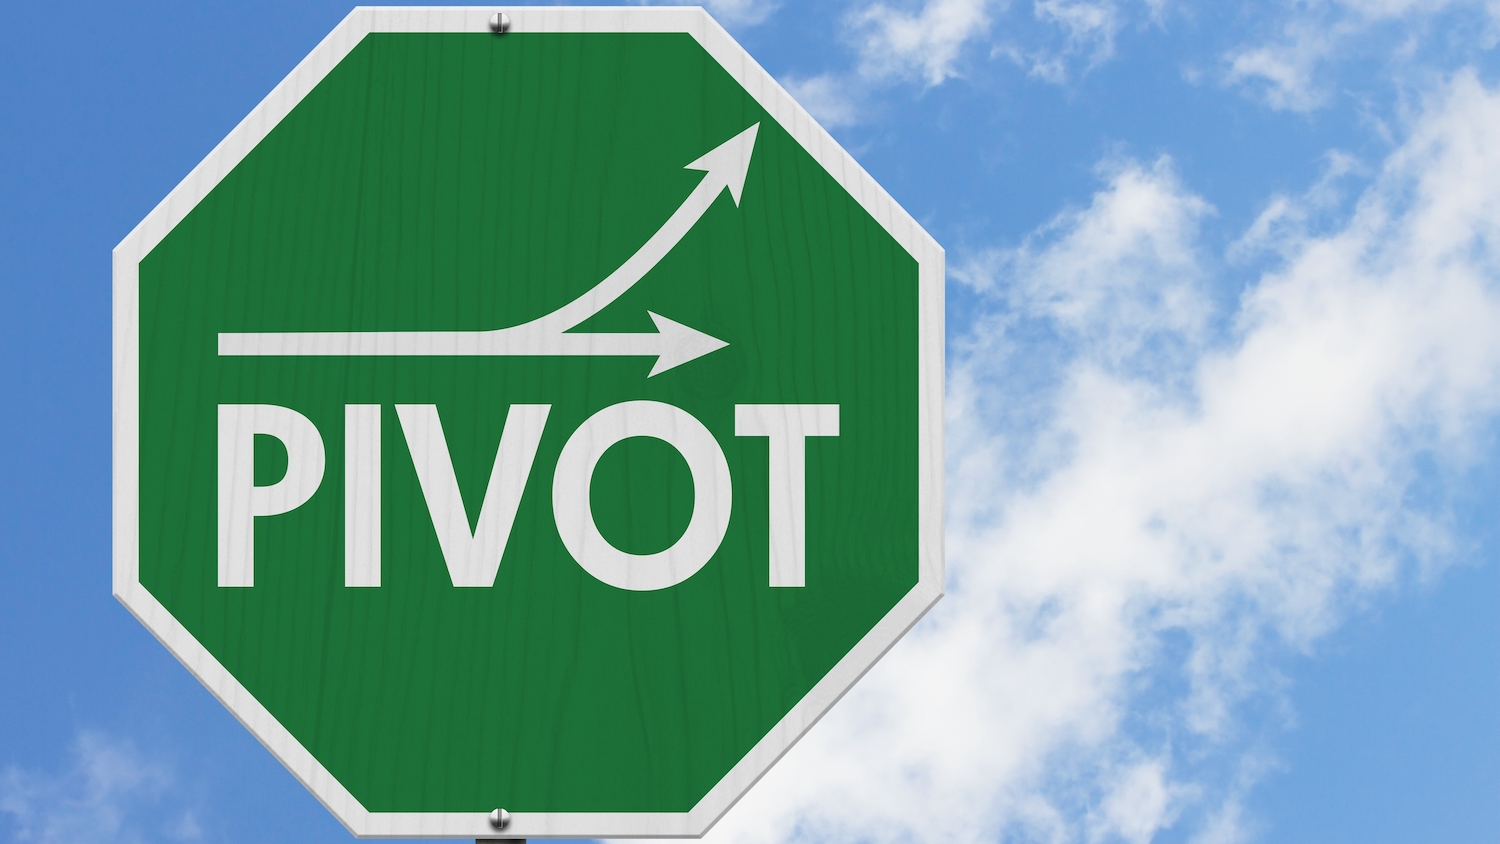 A green street sign with the word "PIVOT" against a background of blue sky and white clouds